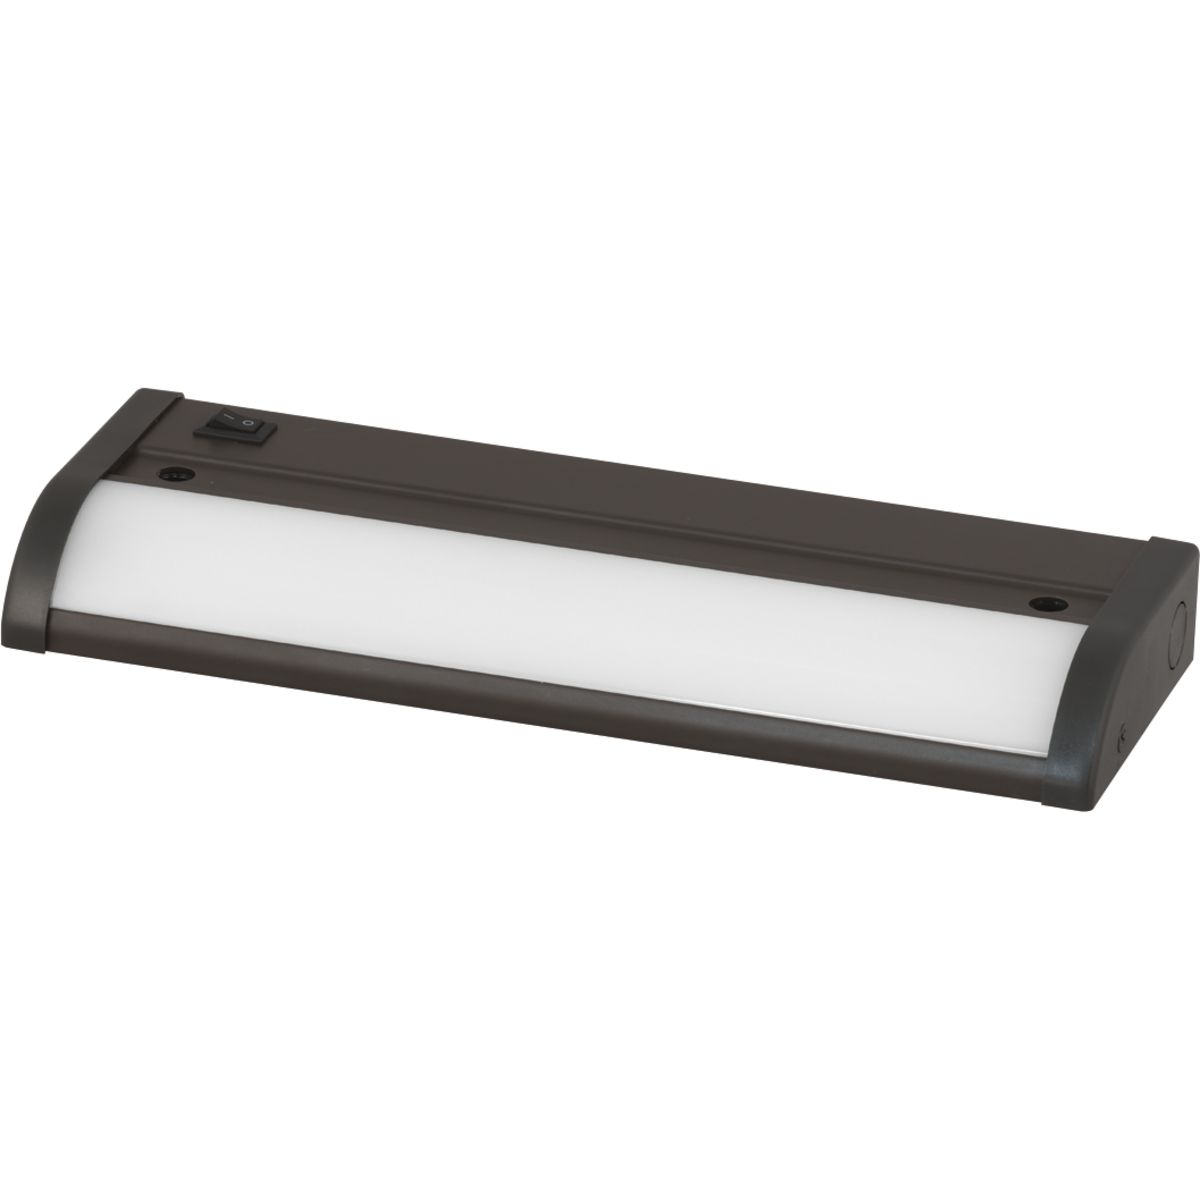 The HIDE-A-LITE V 9 in linear undercabinet fixture provides the ideal solution for residential and light commercial applications. Extruded aluminum construction featuring a lens design to optimizes light distribution to ensure proper illumination. The HIDE-A-LITE V series utilizes a simple mounting method, and direct wiring, for a hassle free installation. Energy efficient and functional lighting, which can be dimmed down to 10 percent with many Forward Phase Triac and Electronic Low Voltage ELV dimmers. 9 in linear undercabinet fixture. Antique Bronze powder coat finish.